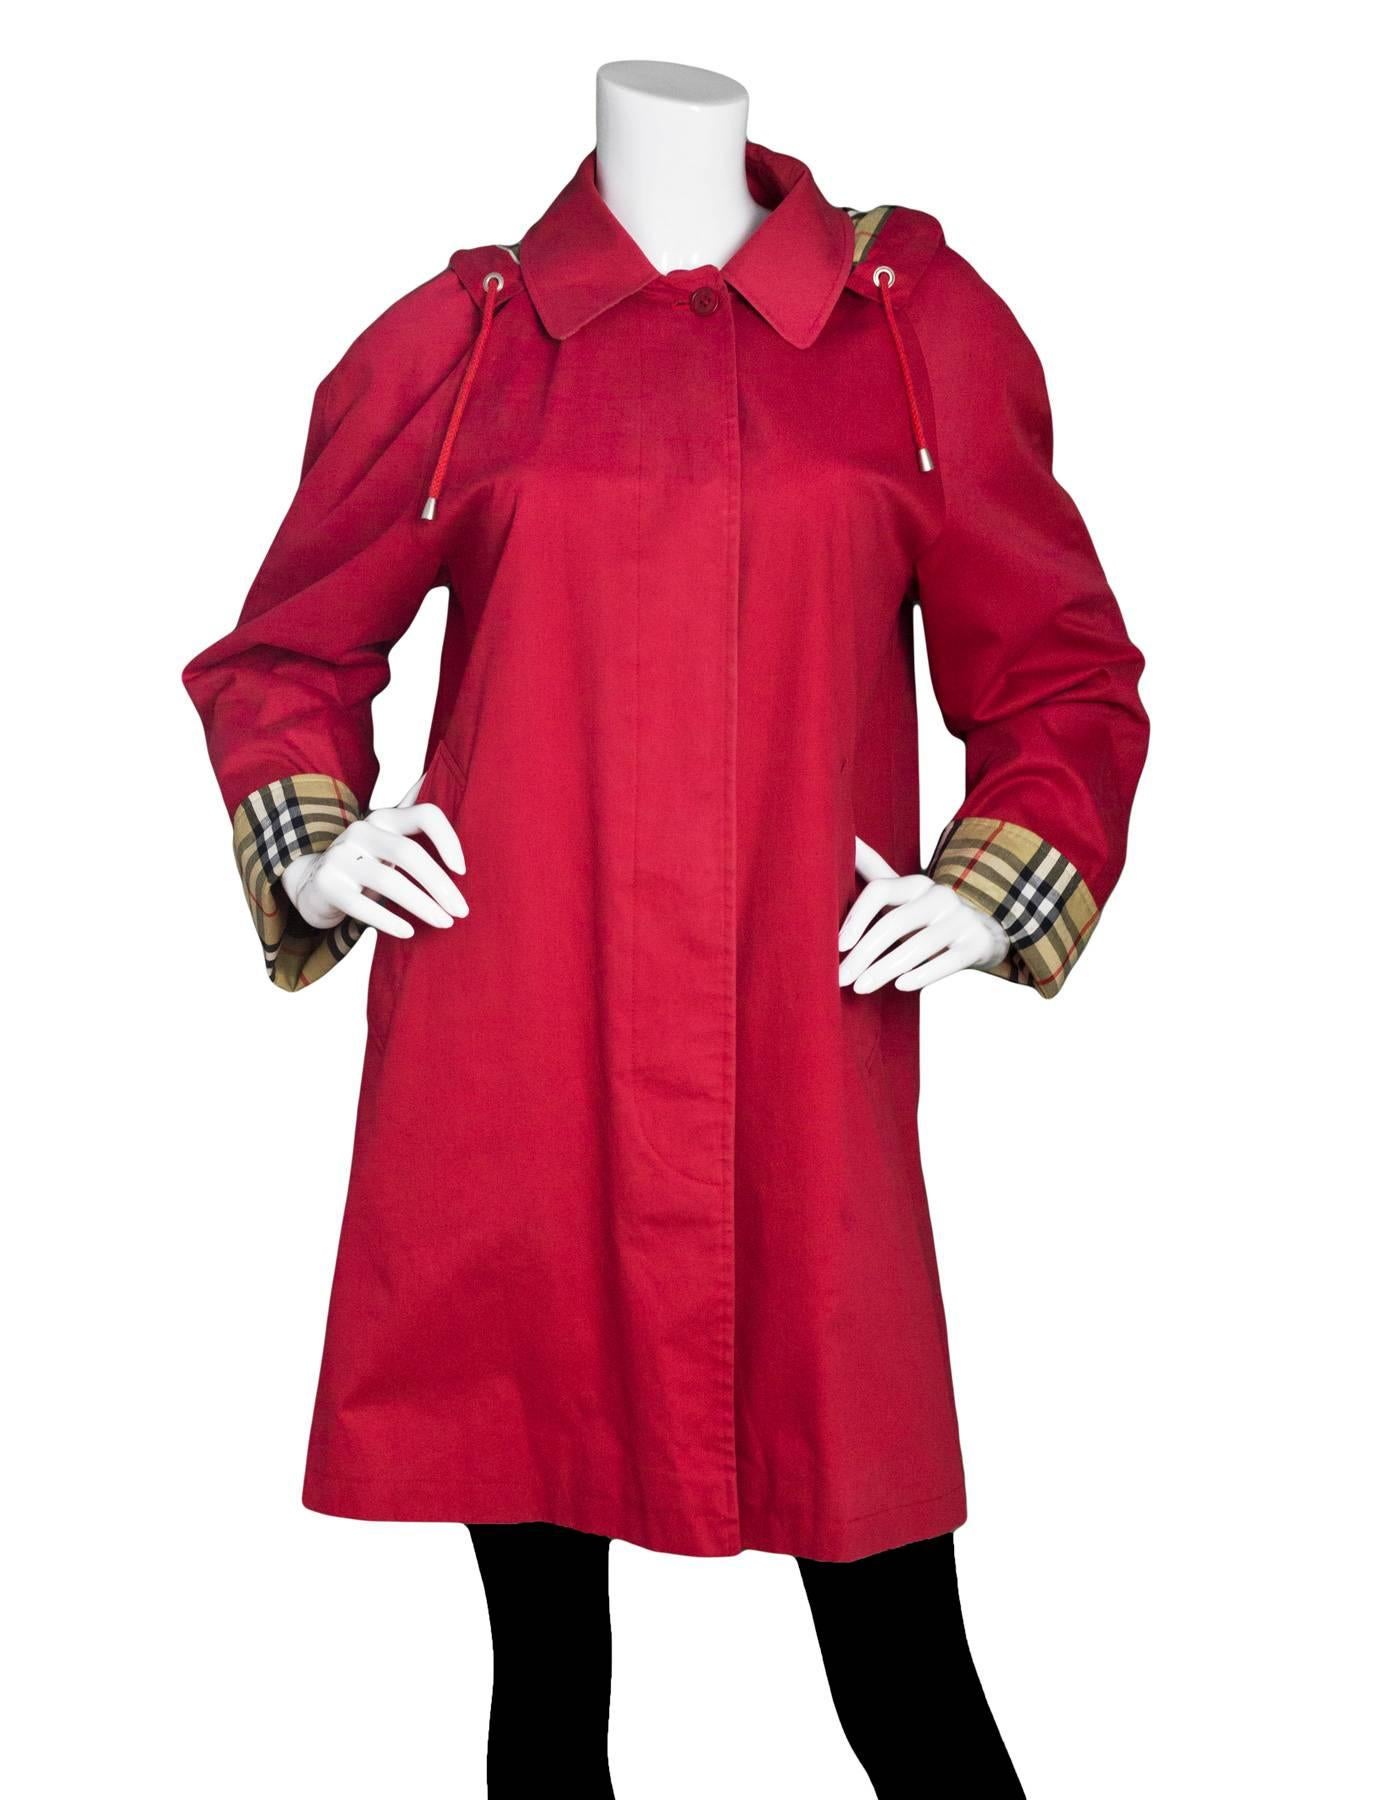 Burberry London Red Cotton Hooded Trench Coat 
Features detachable hood

Color: Red
Composition: 100% cotton
Lining: Nova plaid, 50% cotton, 50% polyester
Closure/Opening: Button down front
Exterior Pockets: Two hip pockets
Interior Pockets: